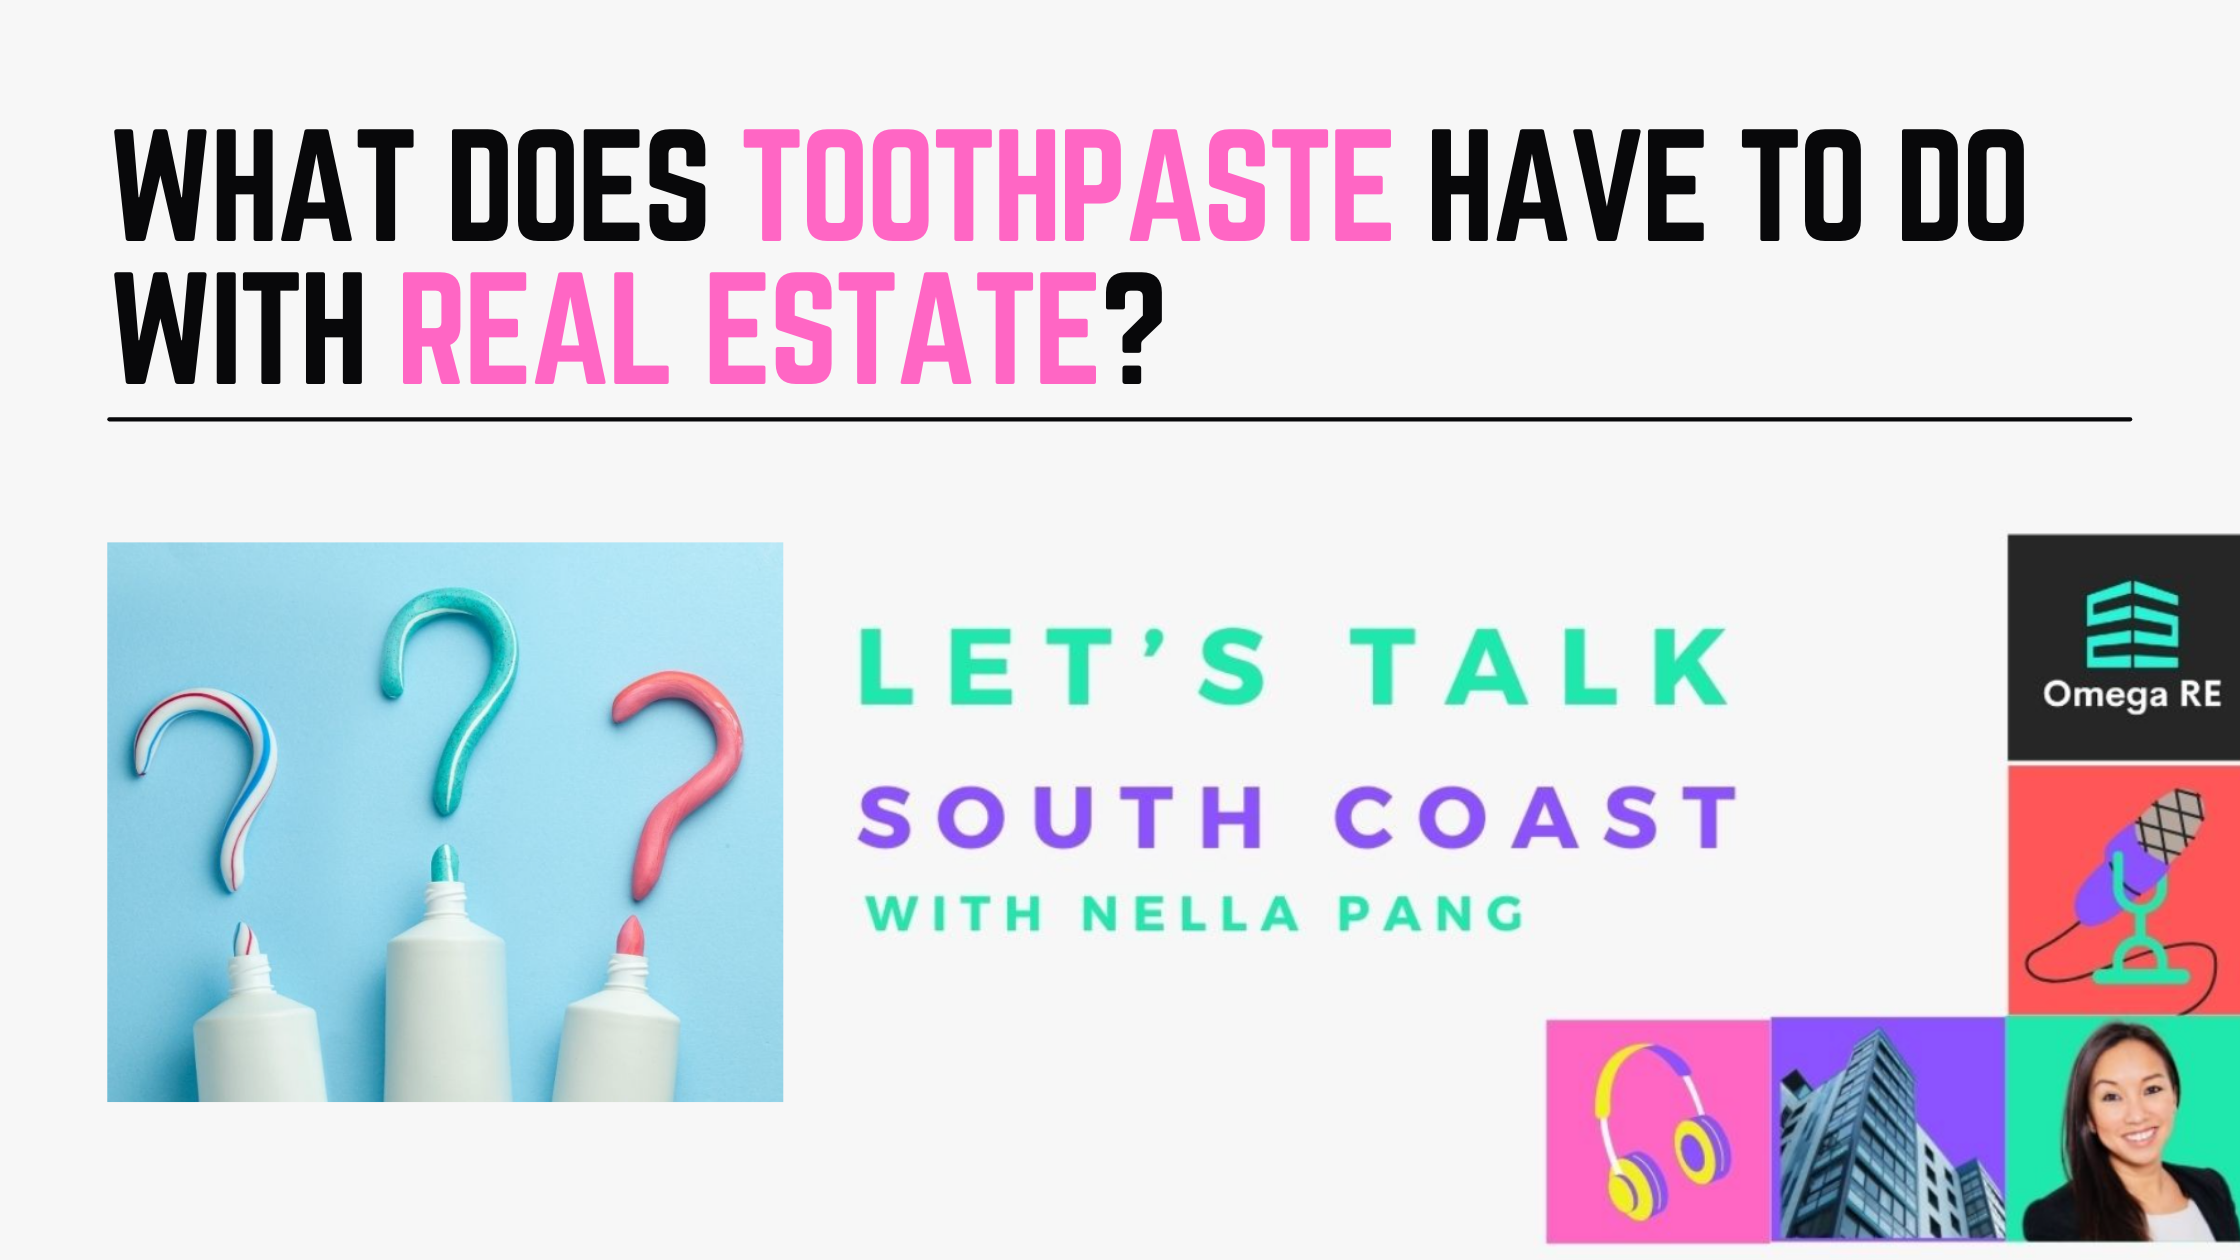 What does toothpaste have to do with real estate?